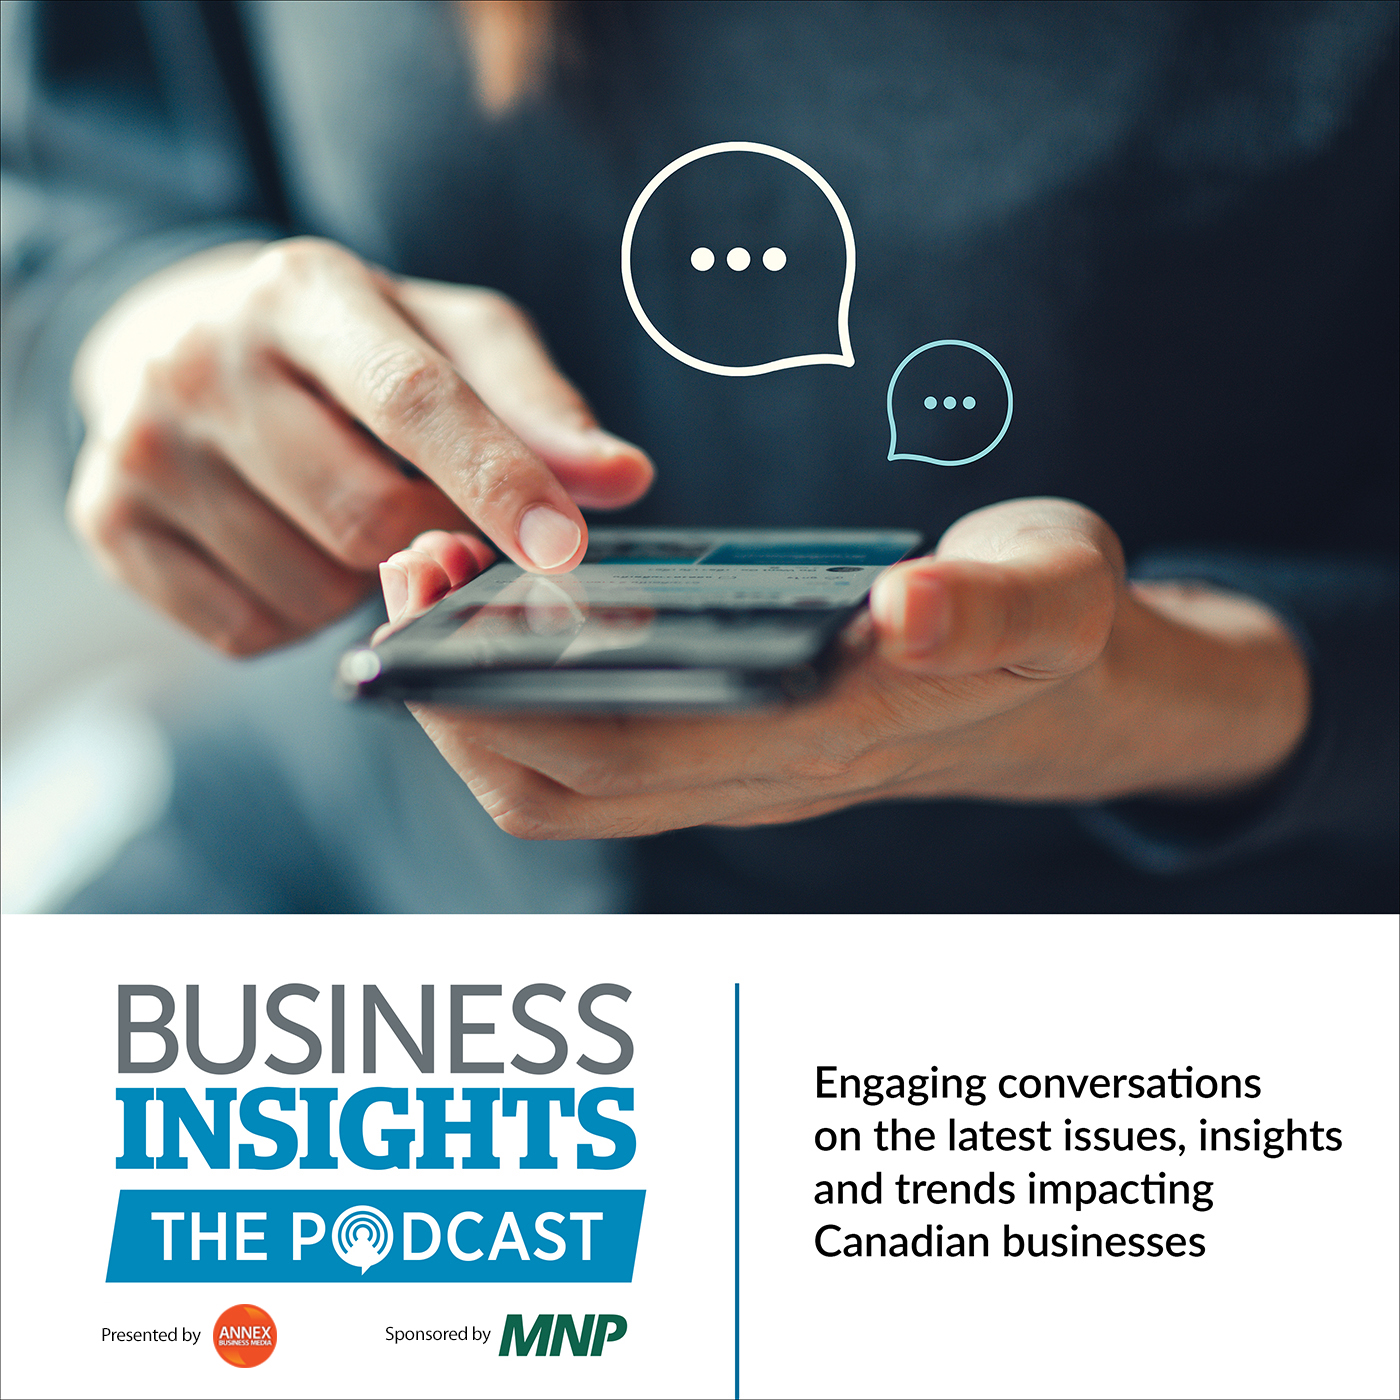 Artwork for podcast Business Insights: The Podcast, sponsored by MNP